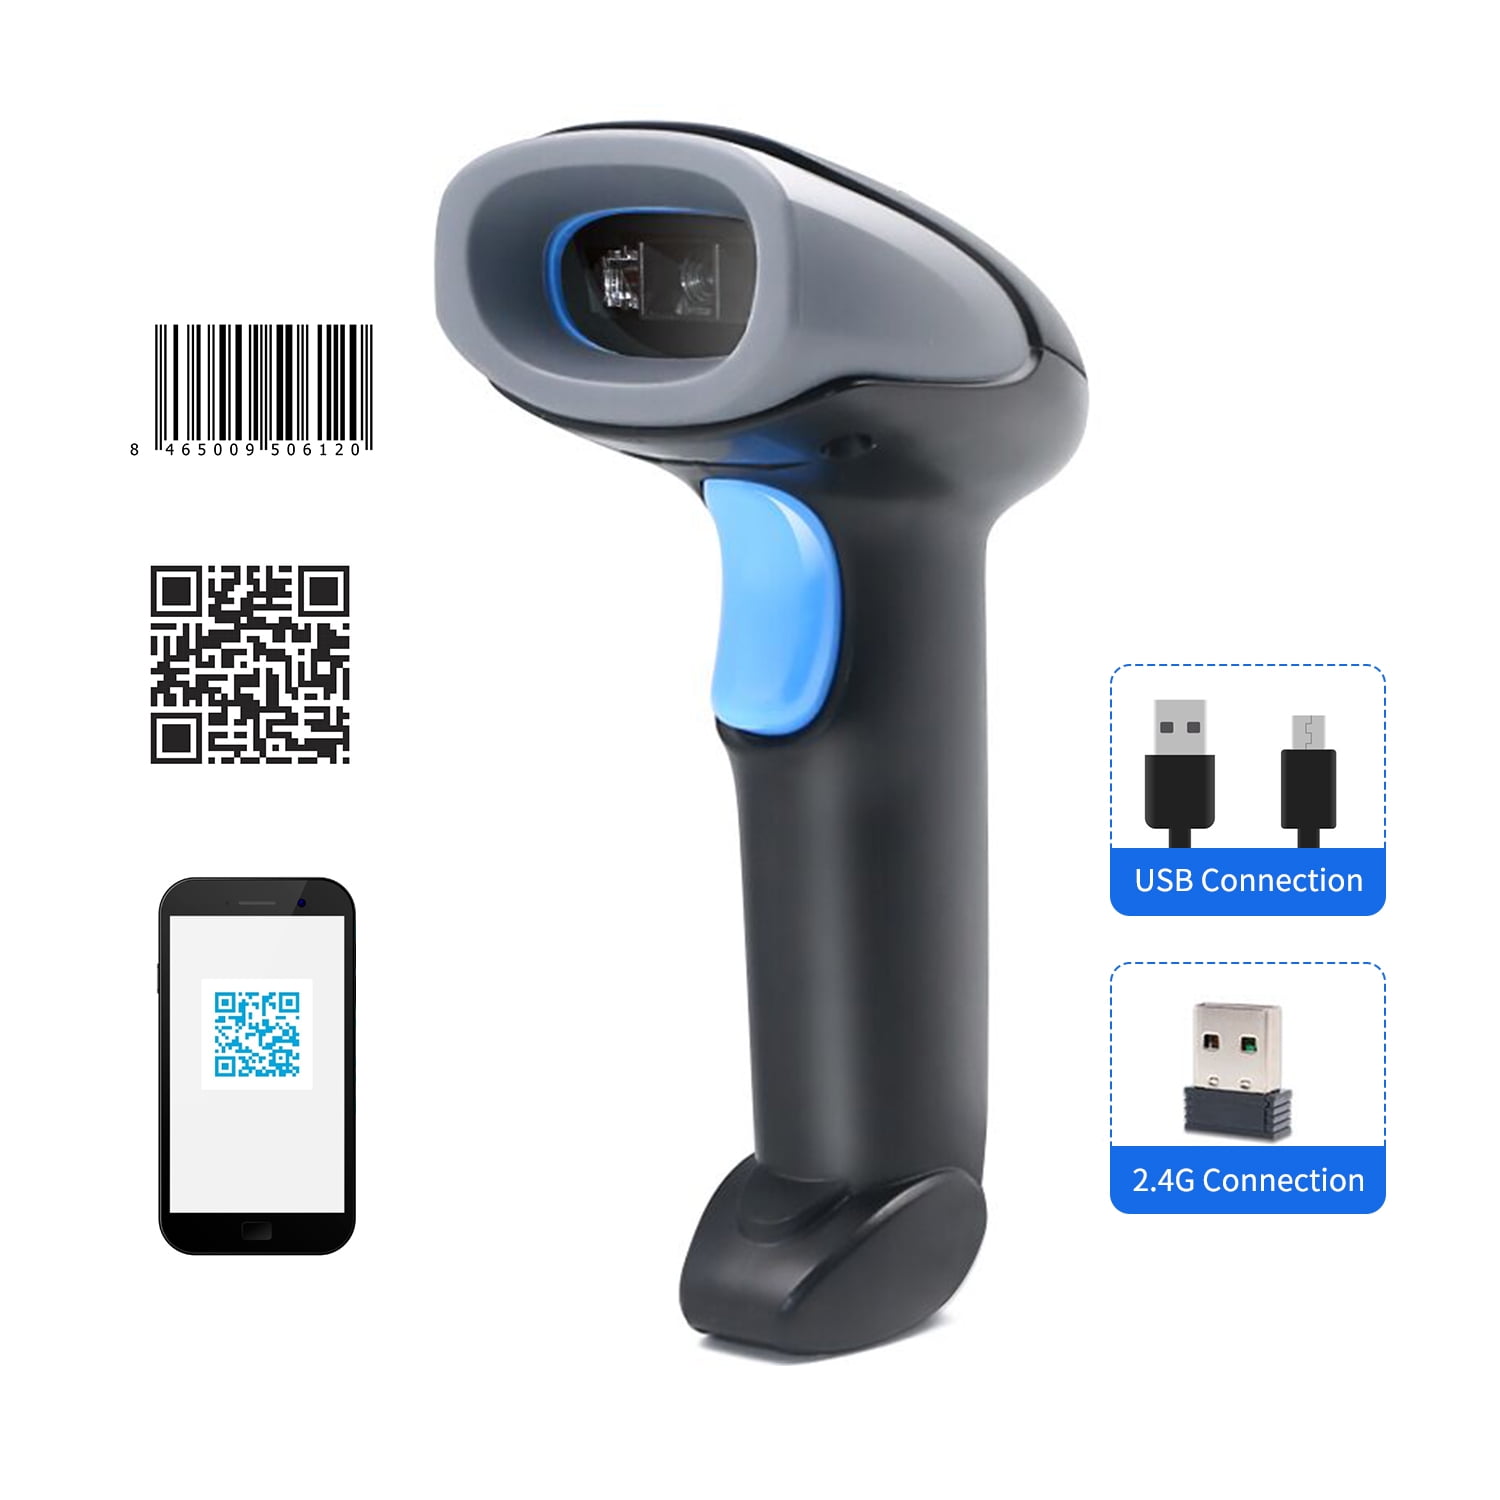 Details about   Eyoyo Barcode Scanner 1D 2D Code Auto Sensing Scanning Reader For Library Mall 